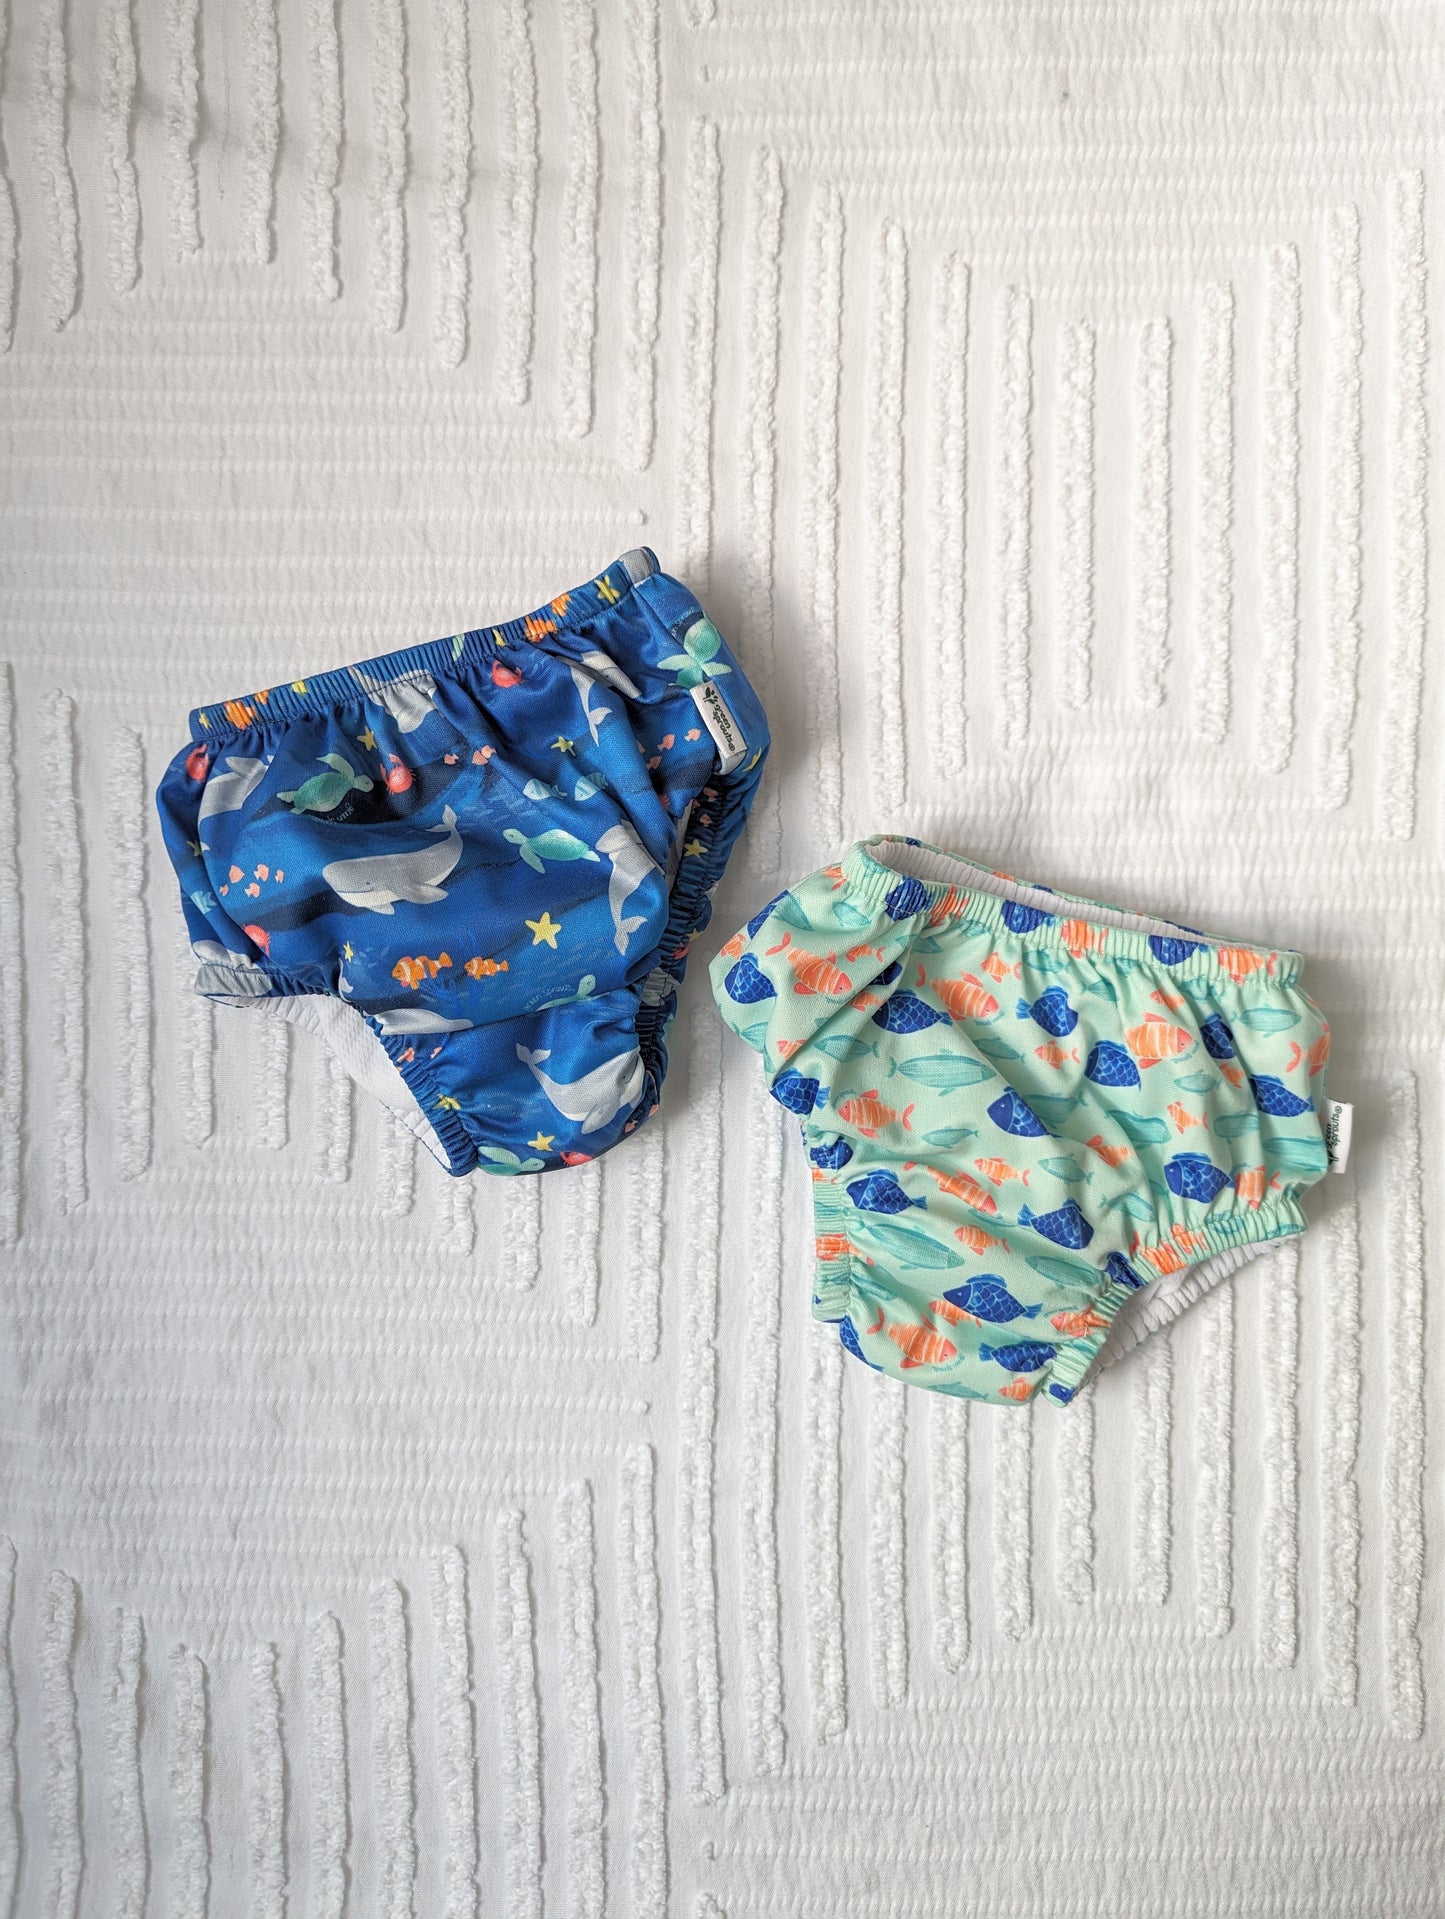 Boys 12 Month (18-22lbs) - Green Sprouts Pull-up Swim Diapers (2)